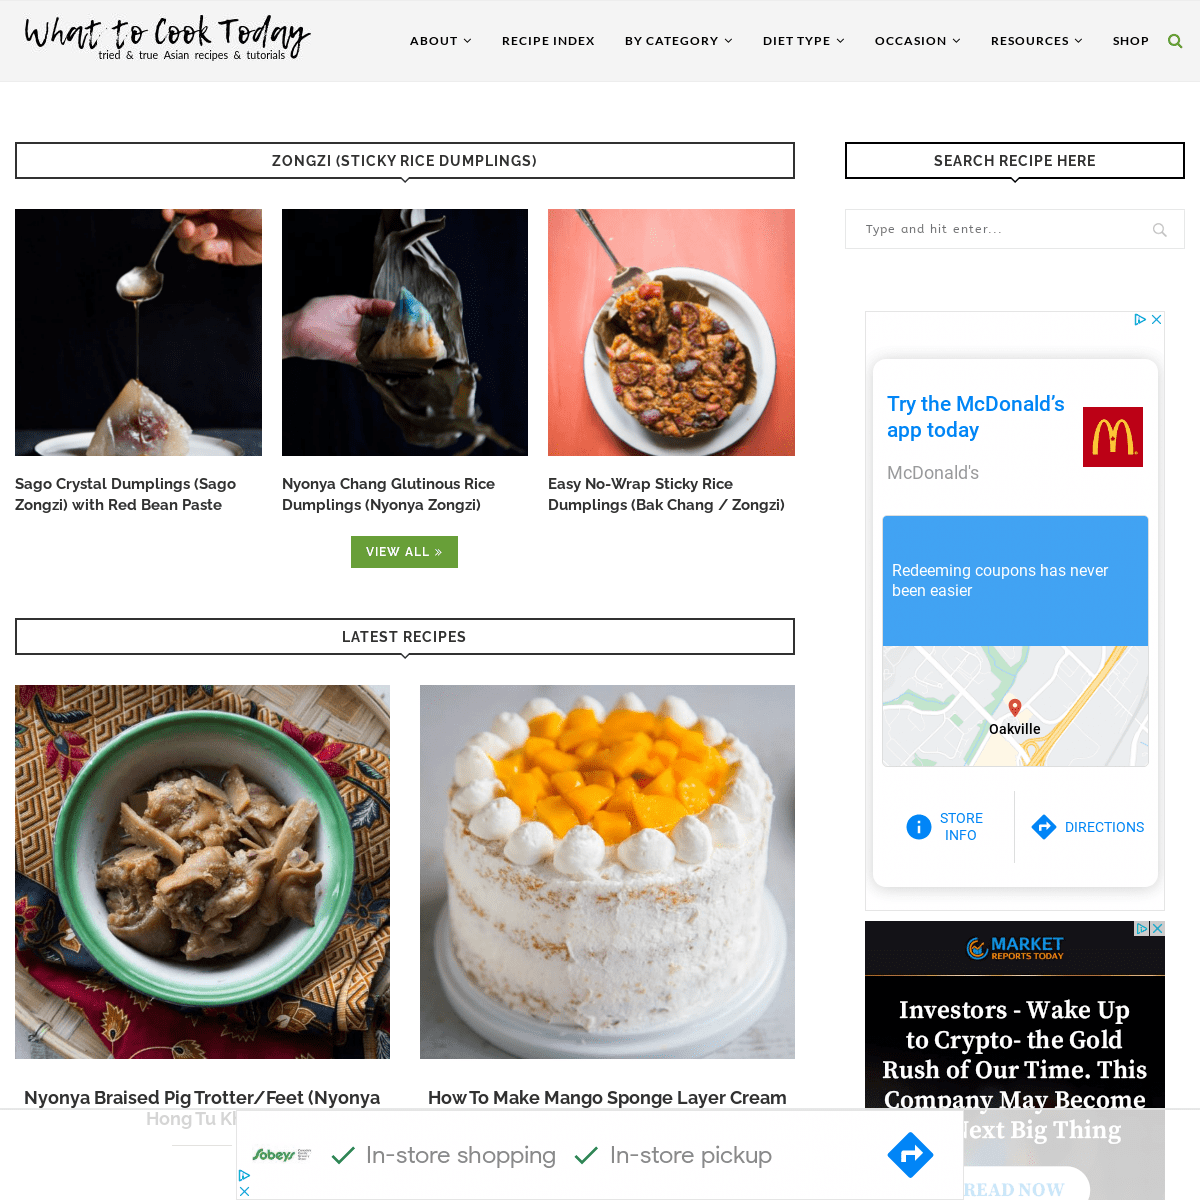 A complete backup of https://whattocooktoday.com